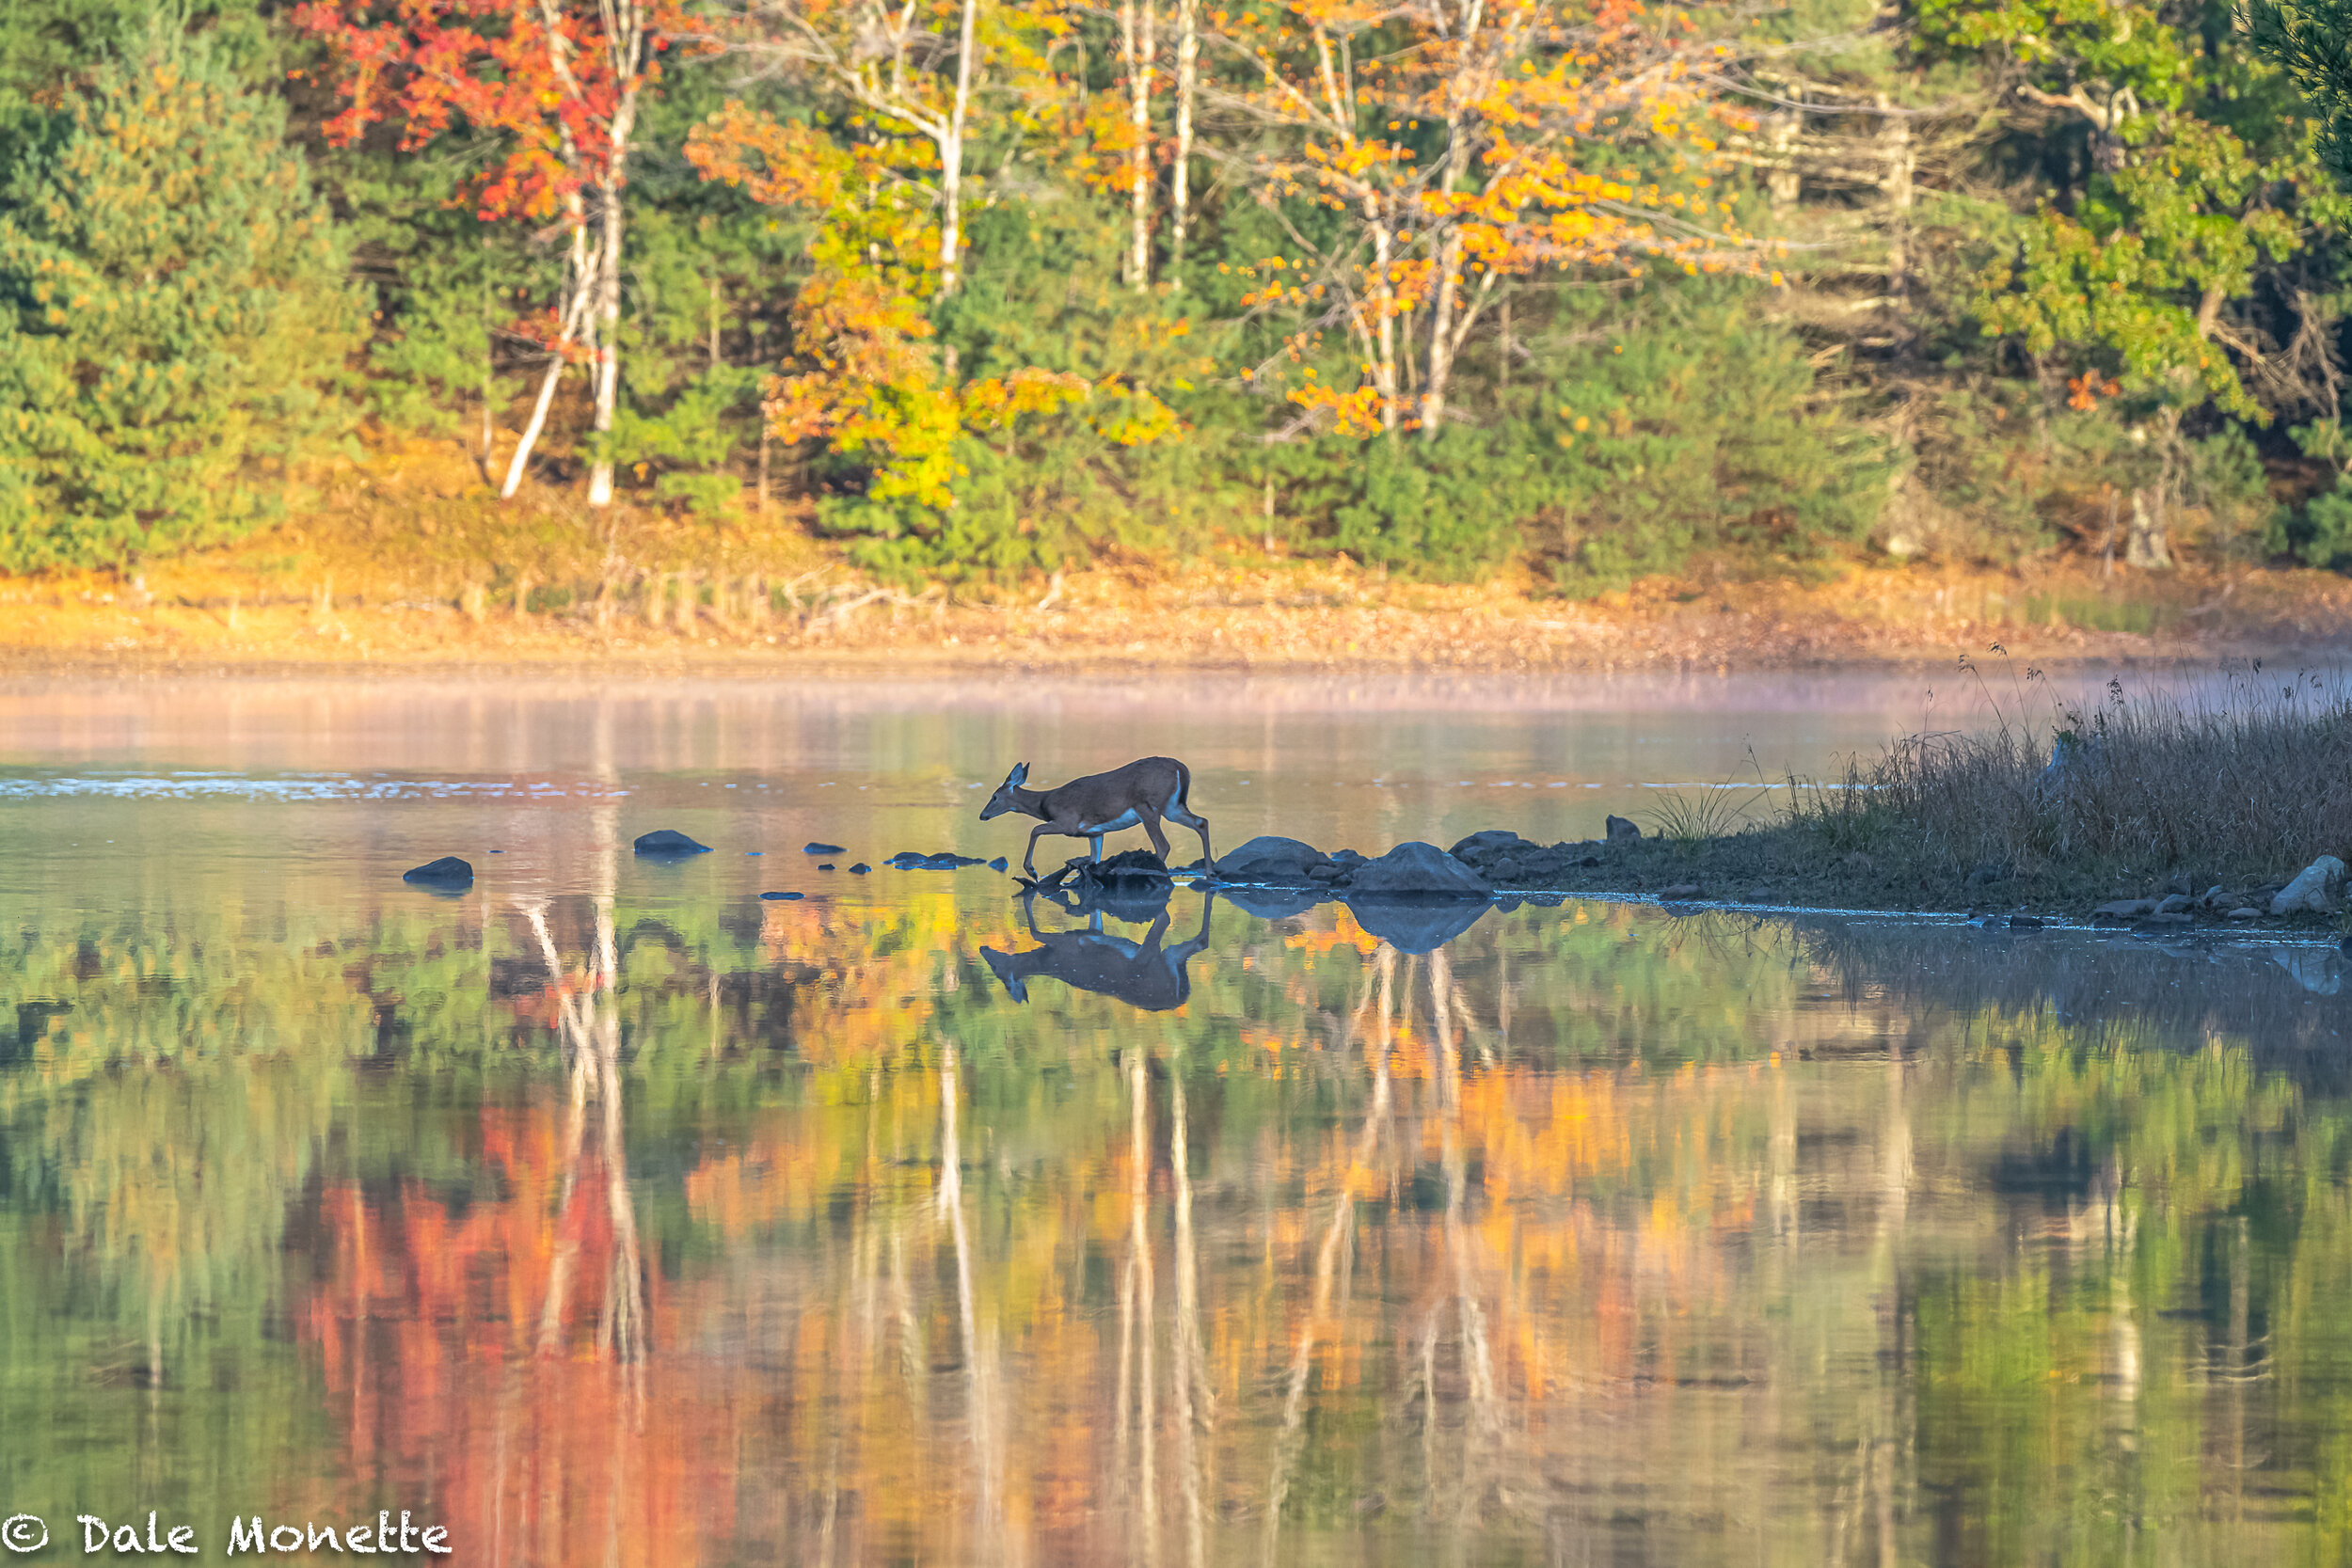   Early morning deer searching for a drink.  She’s in the right place!   After 2 years of back pain I am now pain free and can get far into Quabbin to get images like this with some patience. Life is good!  ..again  